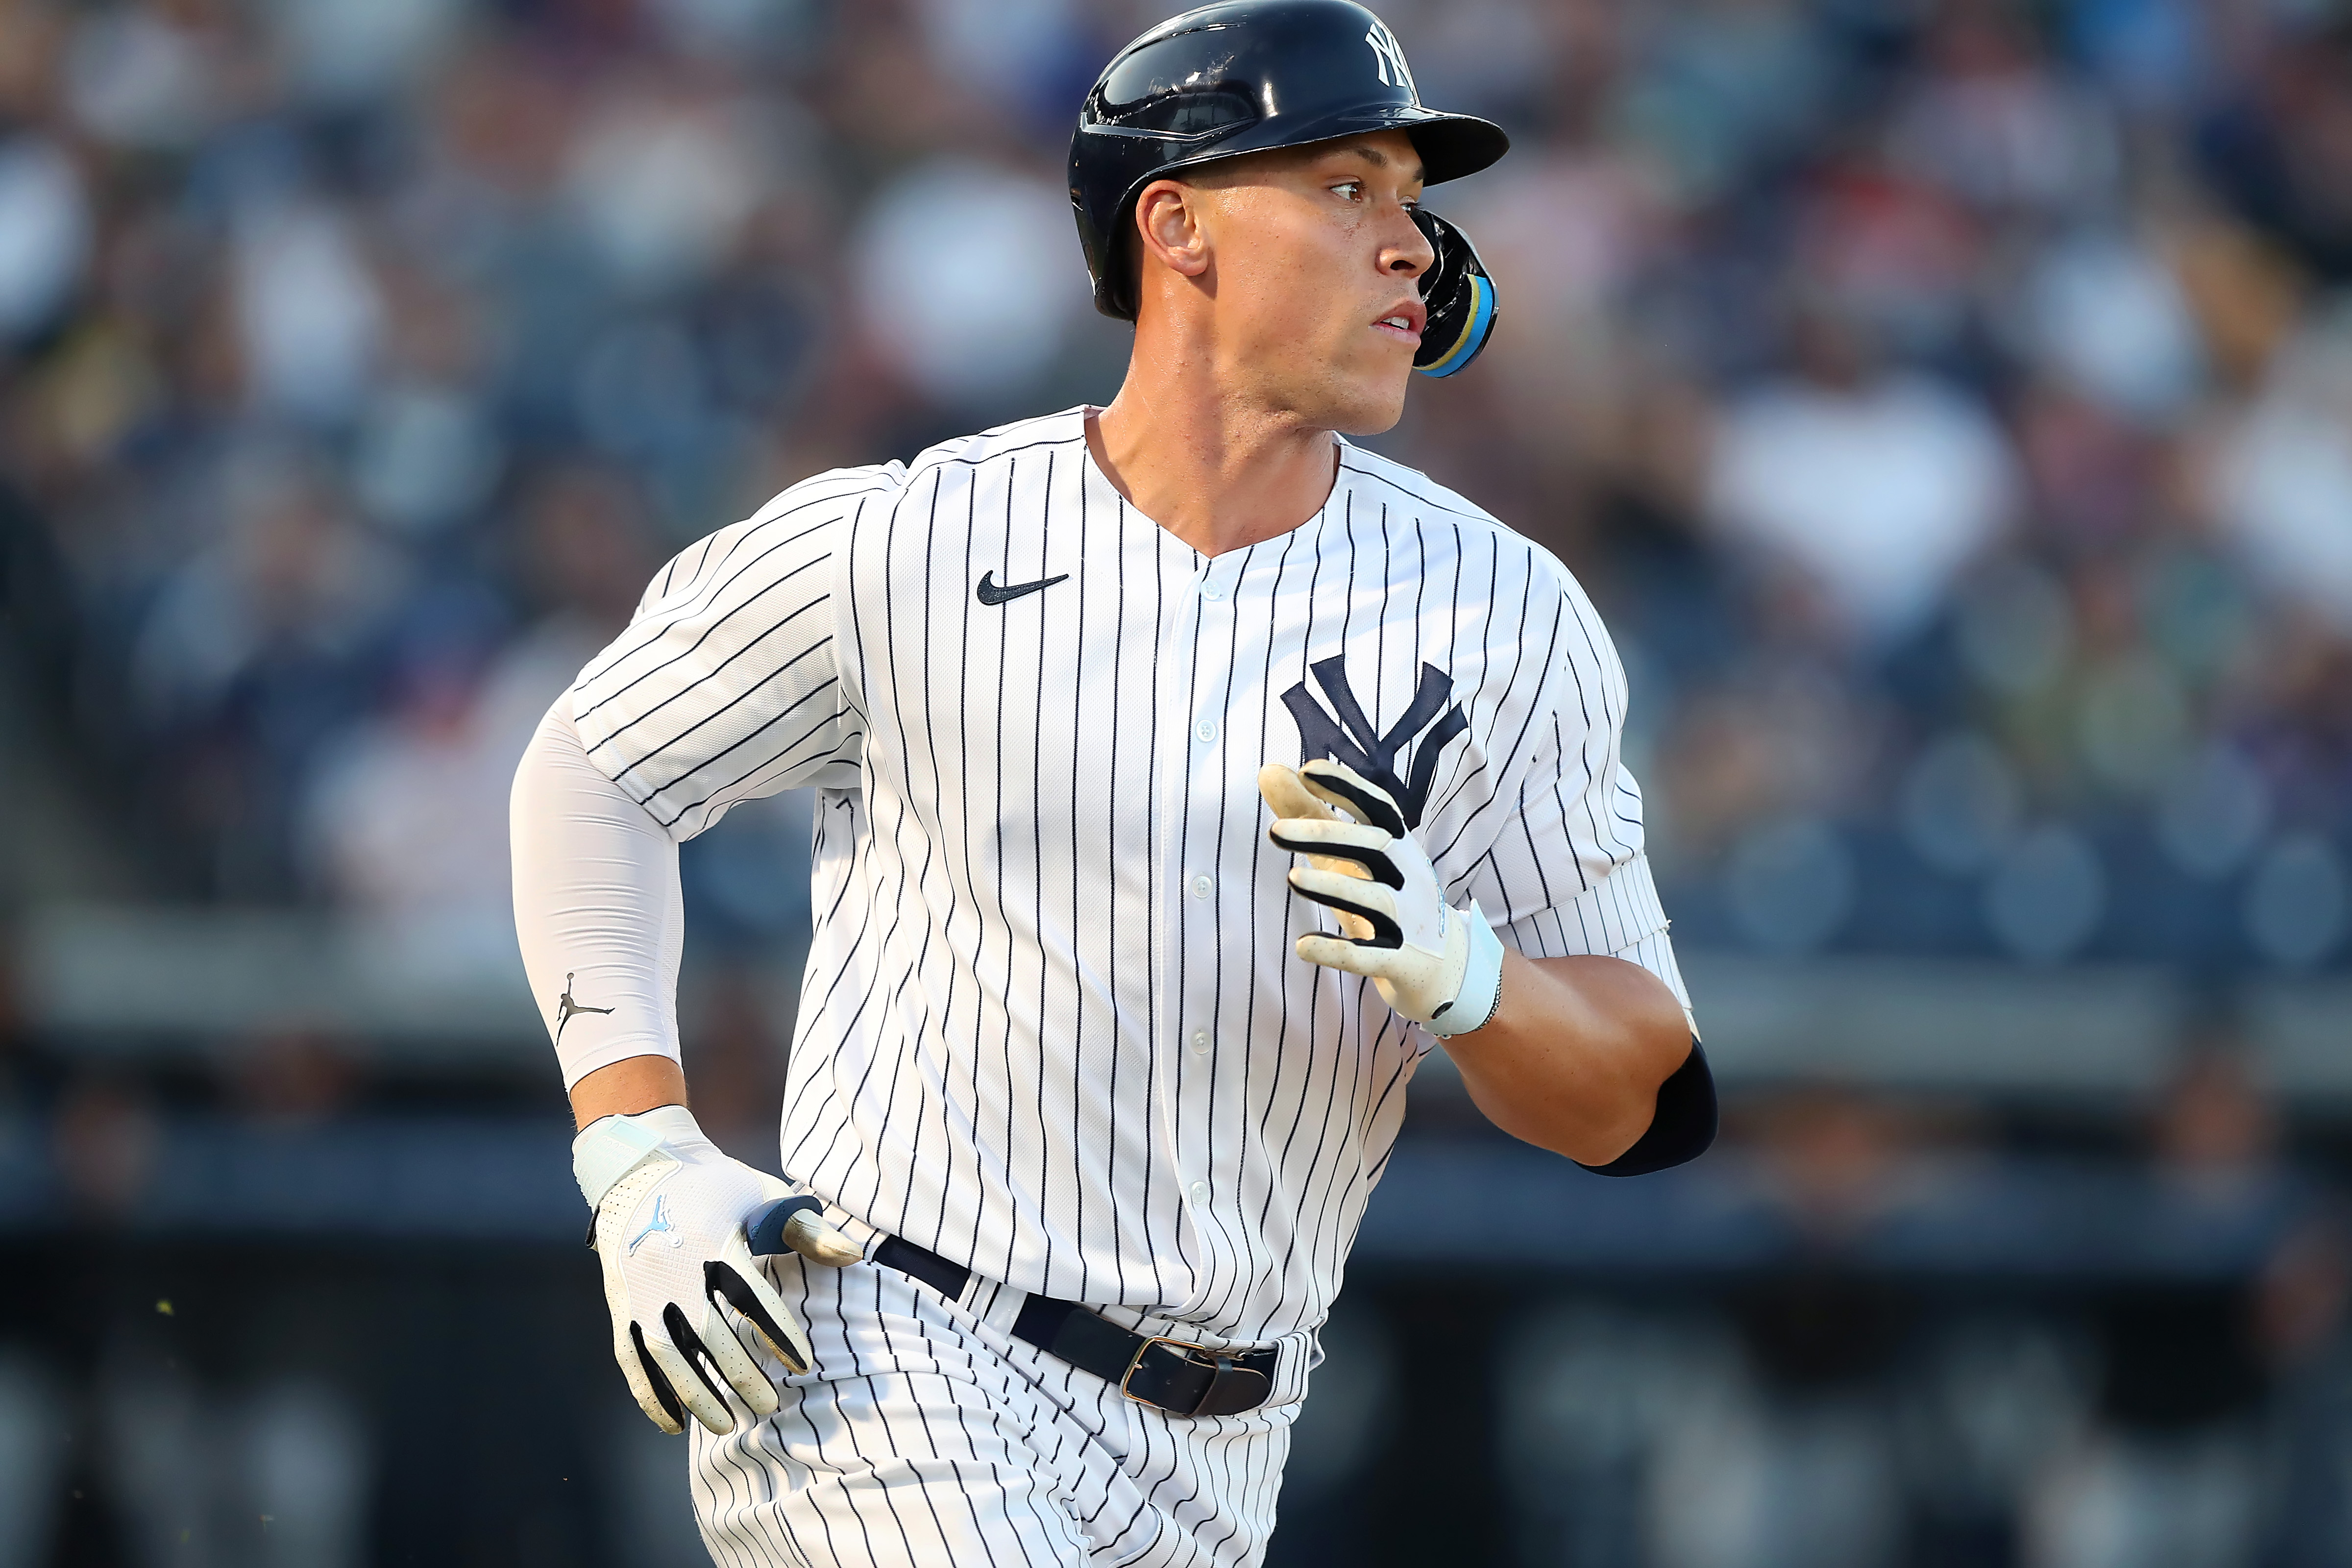 New York Yankees Outfielder Aaron Judge (99) trots to first base during the spring training game between the Pittsburgh Pirates and the New York Yankees on March 16, 2023 at George M. Steinbrenner Field in Tampa, FL.